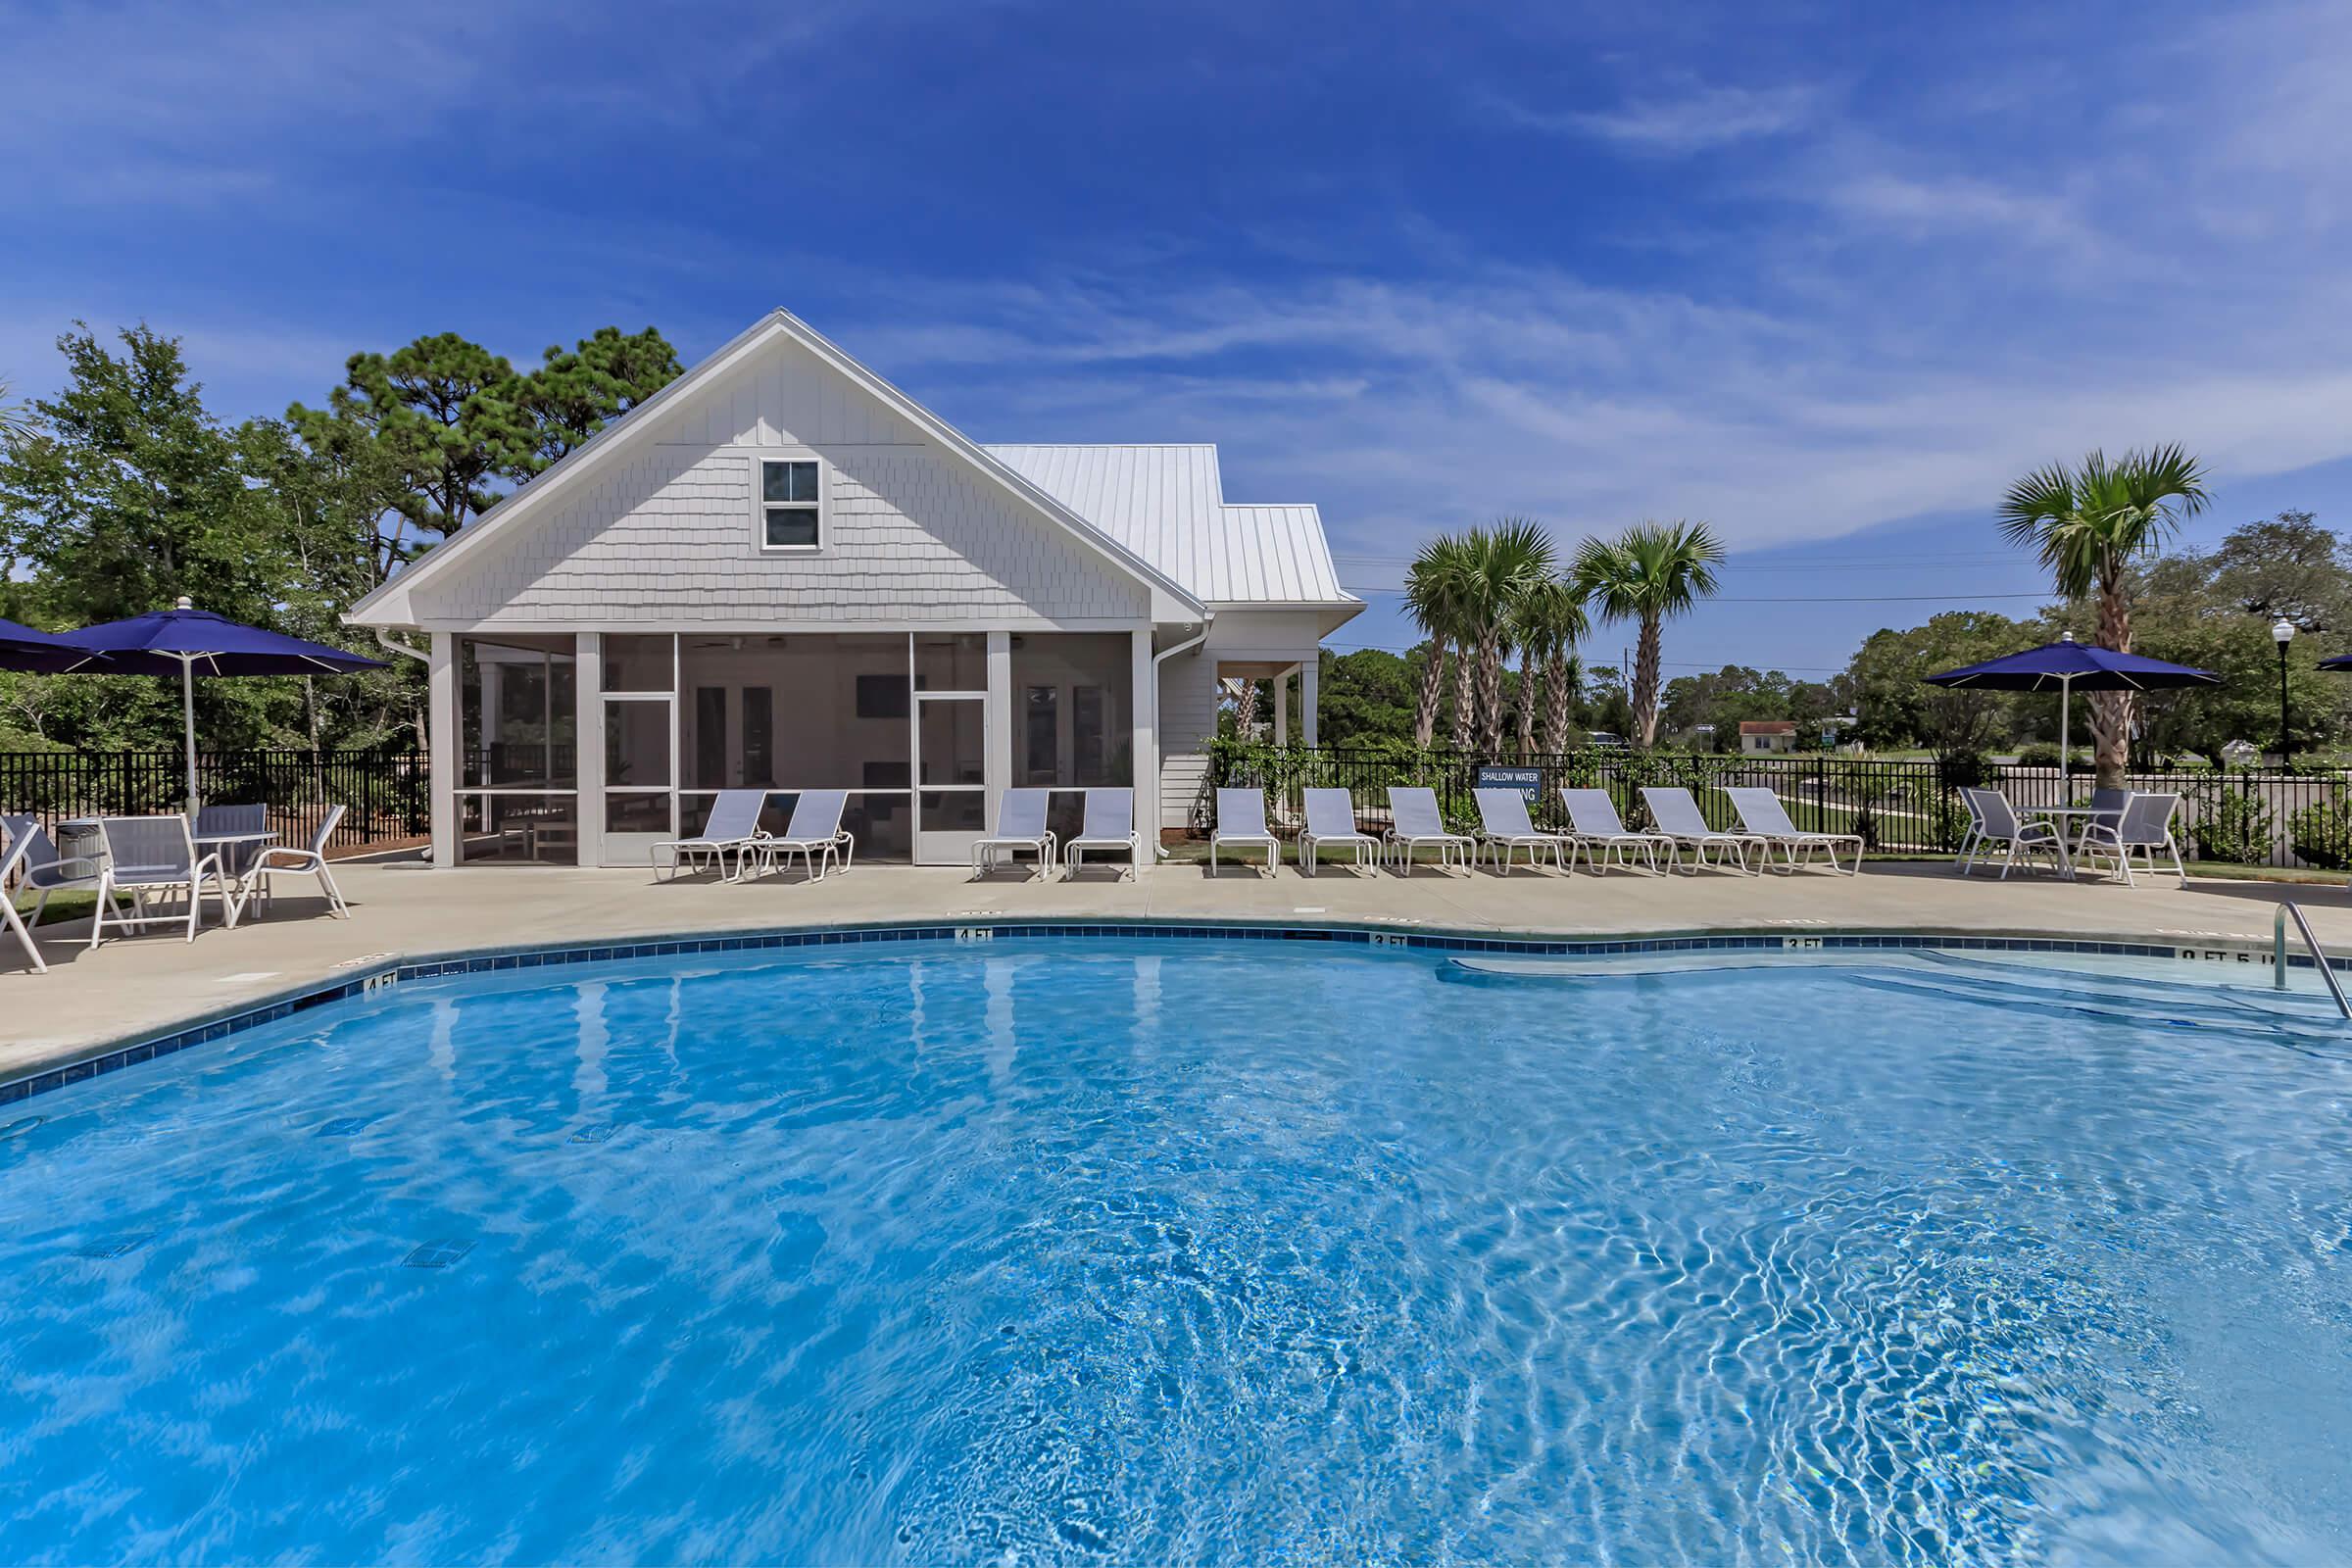 Soak up the sun at the shimmering swimming pool at The Townhomes at Beau Rivage in Wilmington, North Carolina.